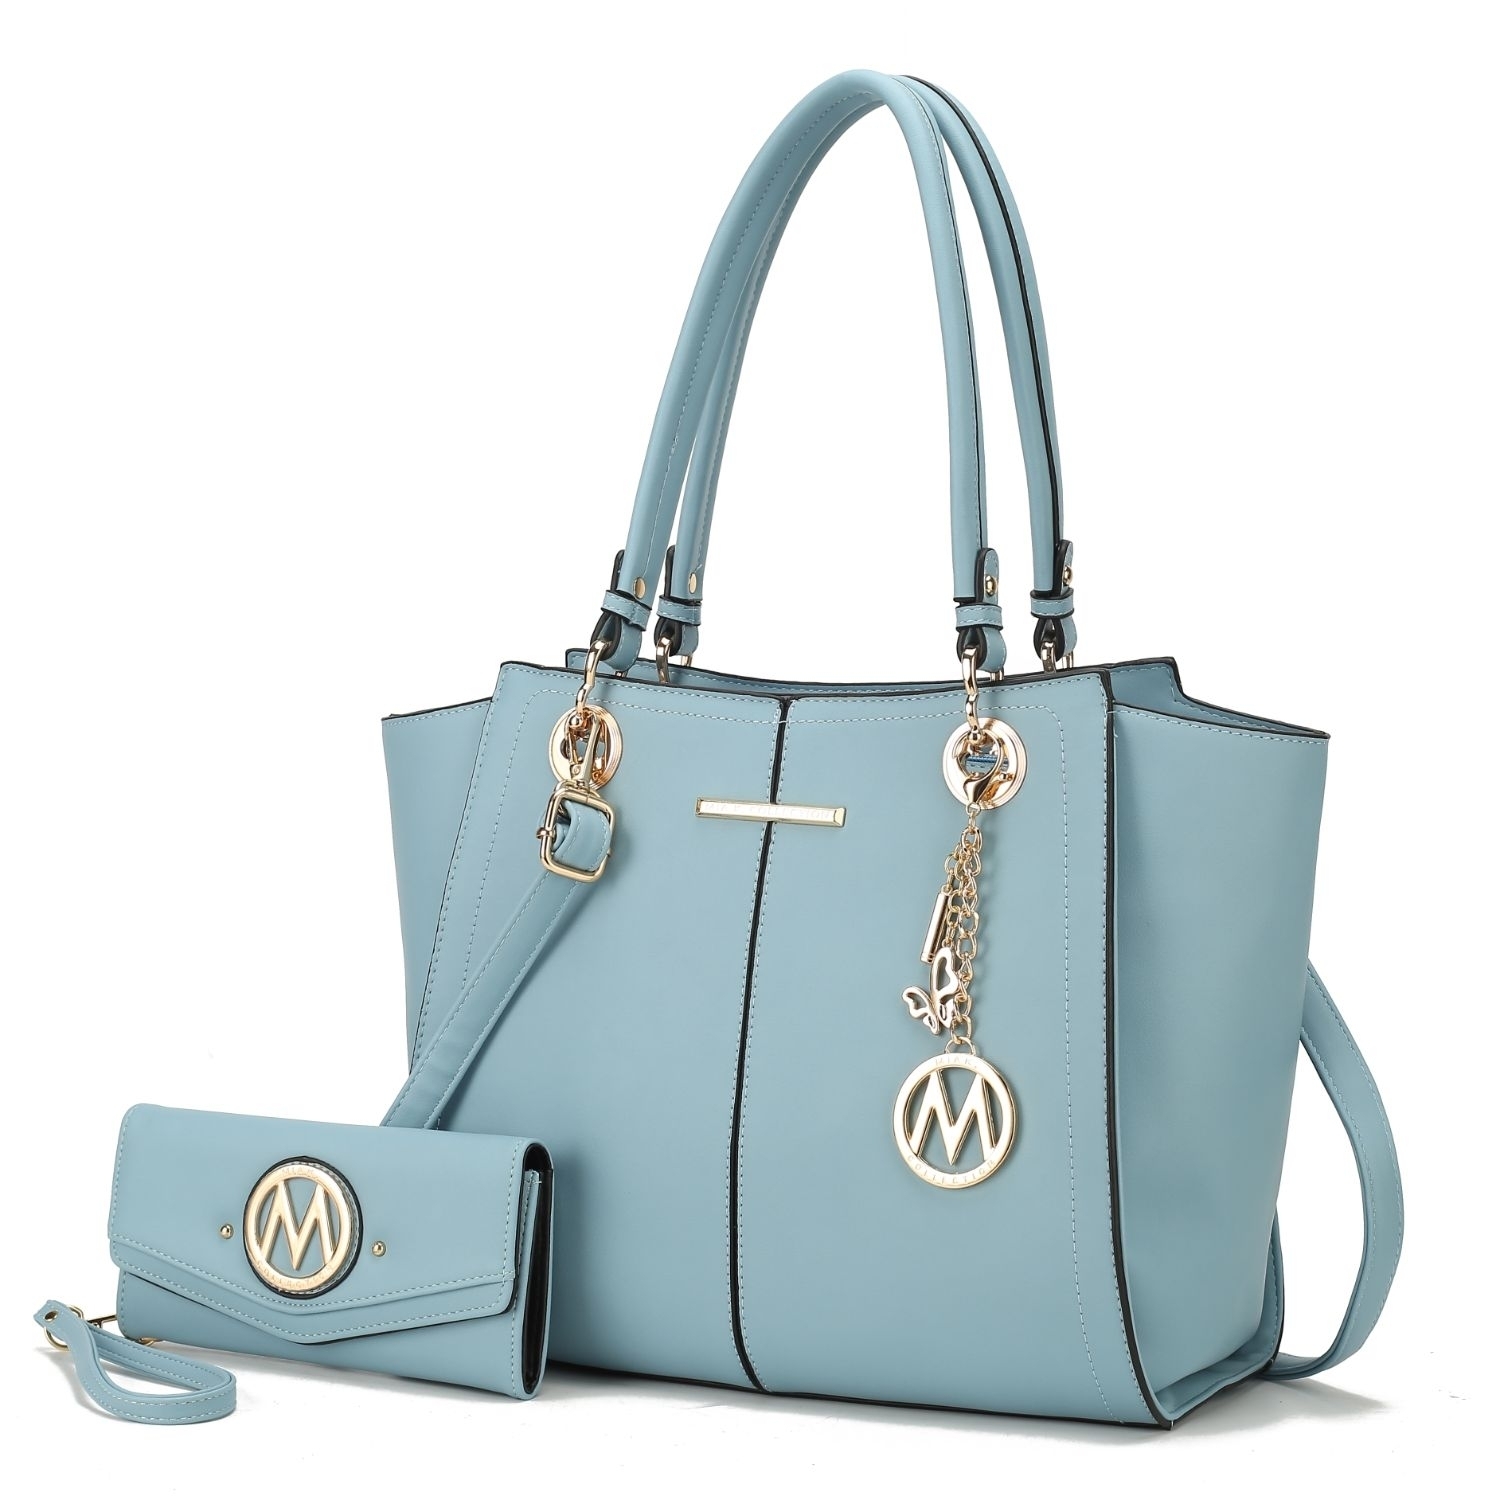 MKF Collection Ivy Vegan Leather Women's Tote Handbag By Mia K With Wallet -2 Pieces - Baby Blue